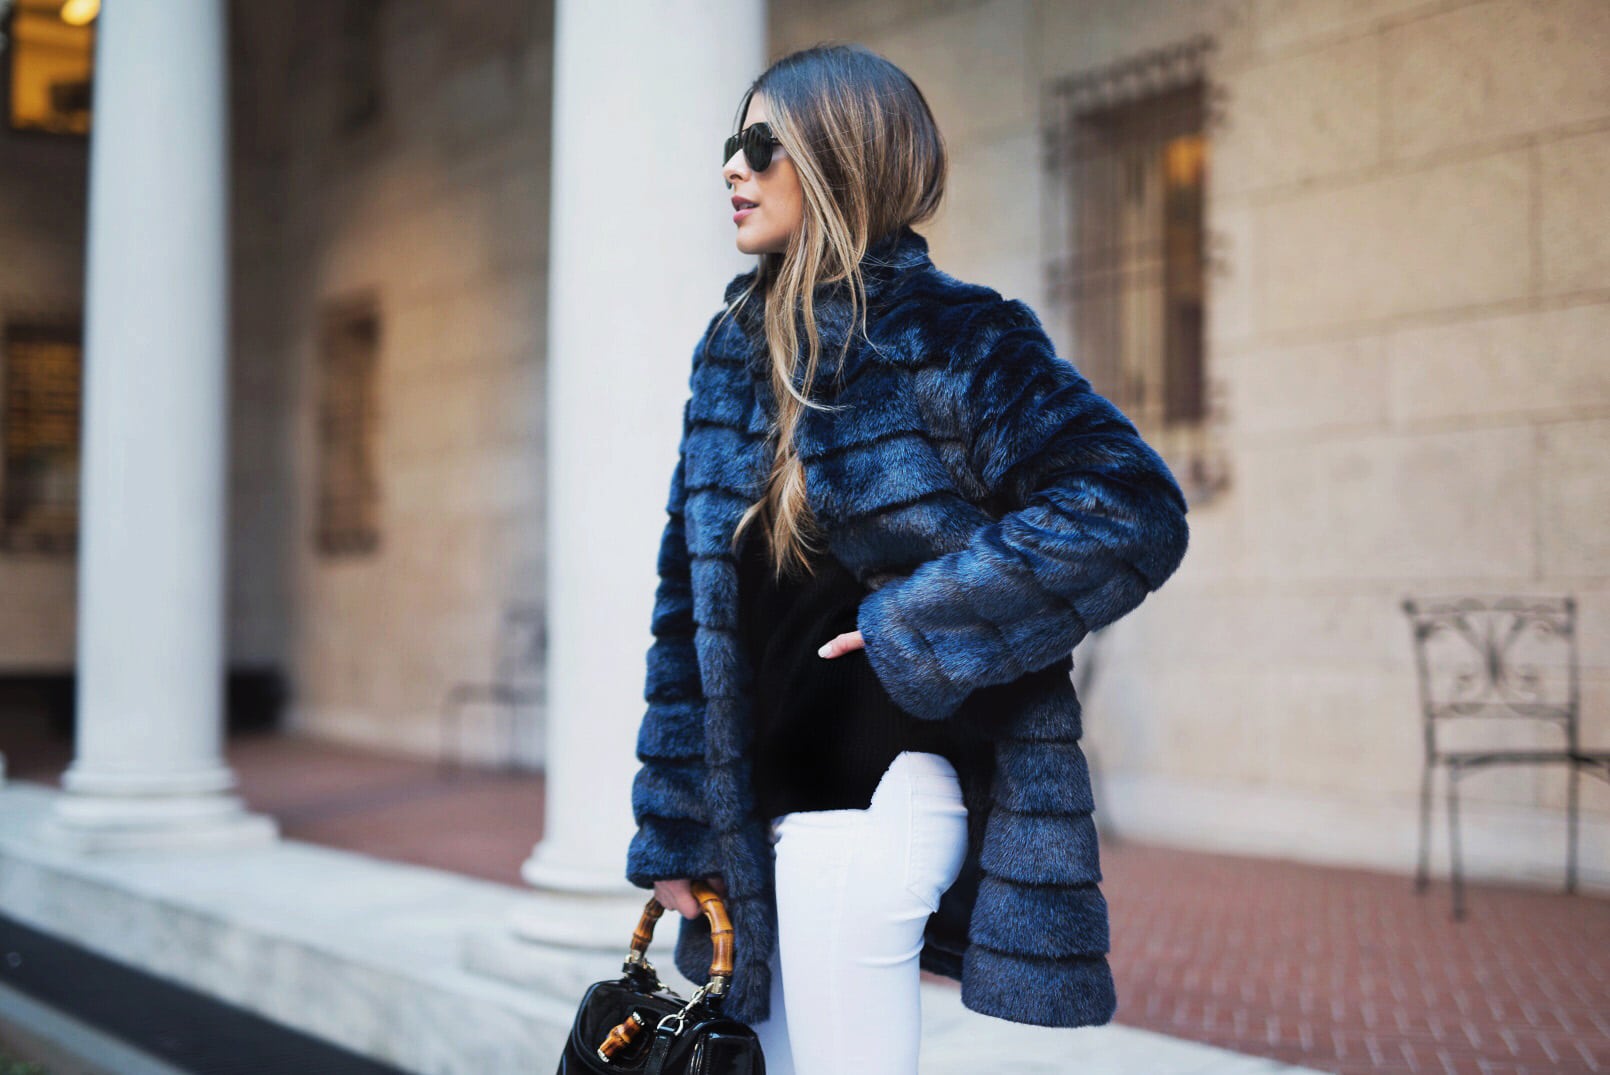 Pam Hetlinger wearing a winter chic outfit, Navy Faux-Fur Coat, White Jeans, Black Booties, Black turtleneck and Gucci Bamboo Bag.